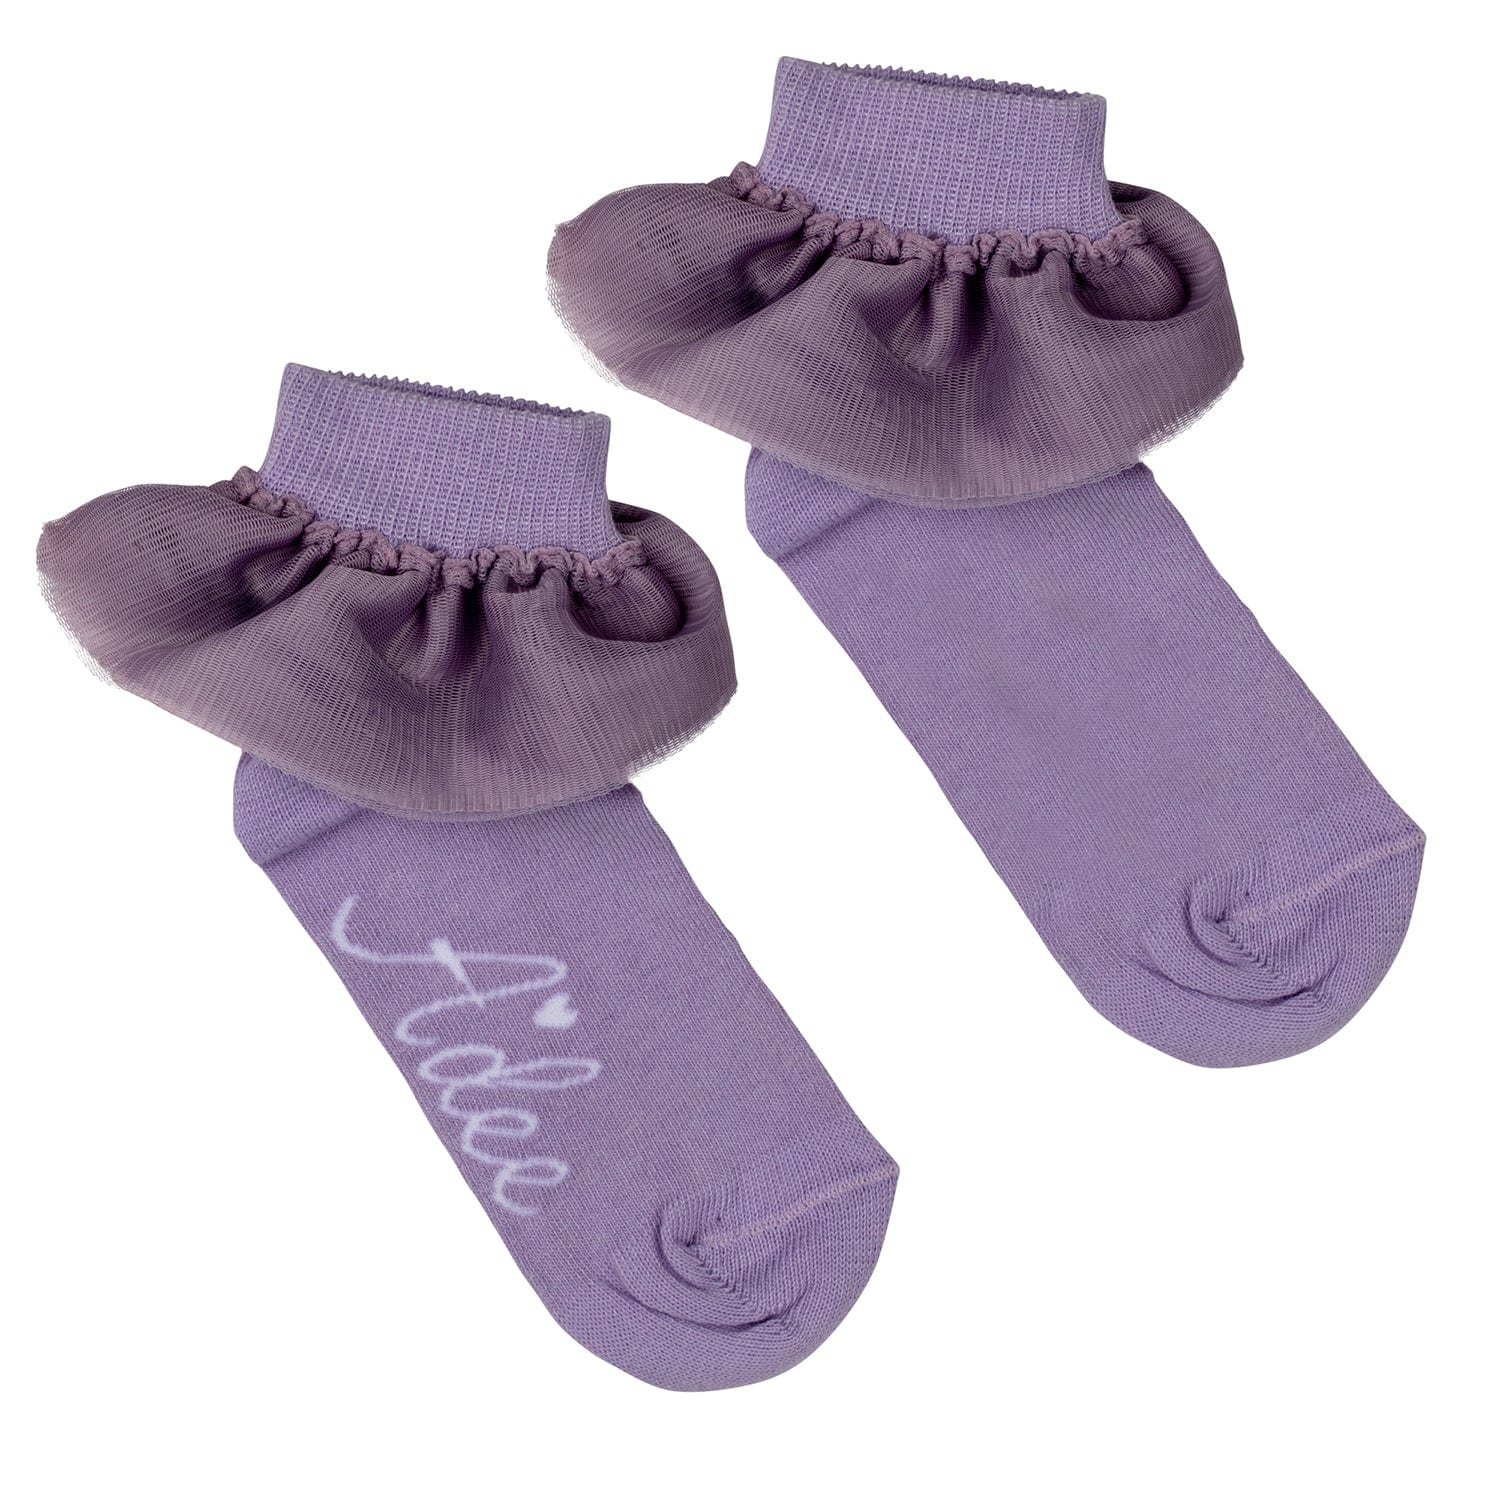 A DEE - Nova Popping Pastels Tulle Ankle Socks - Lilac